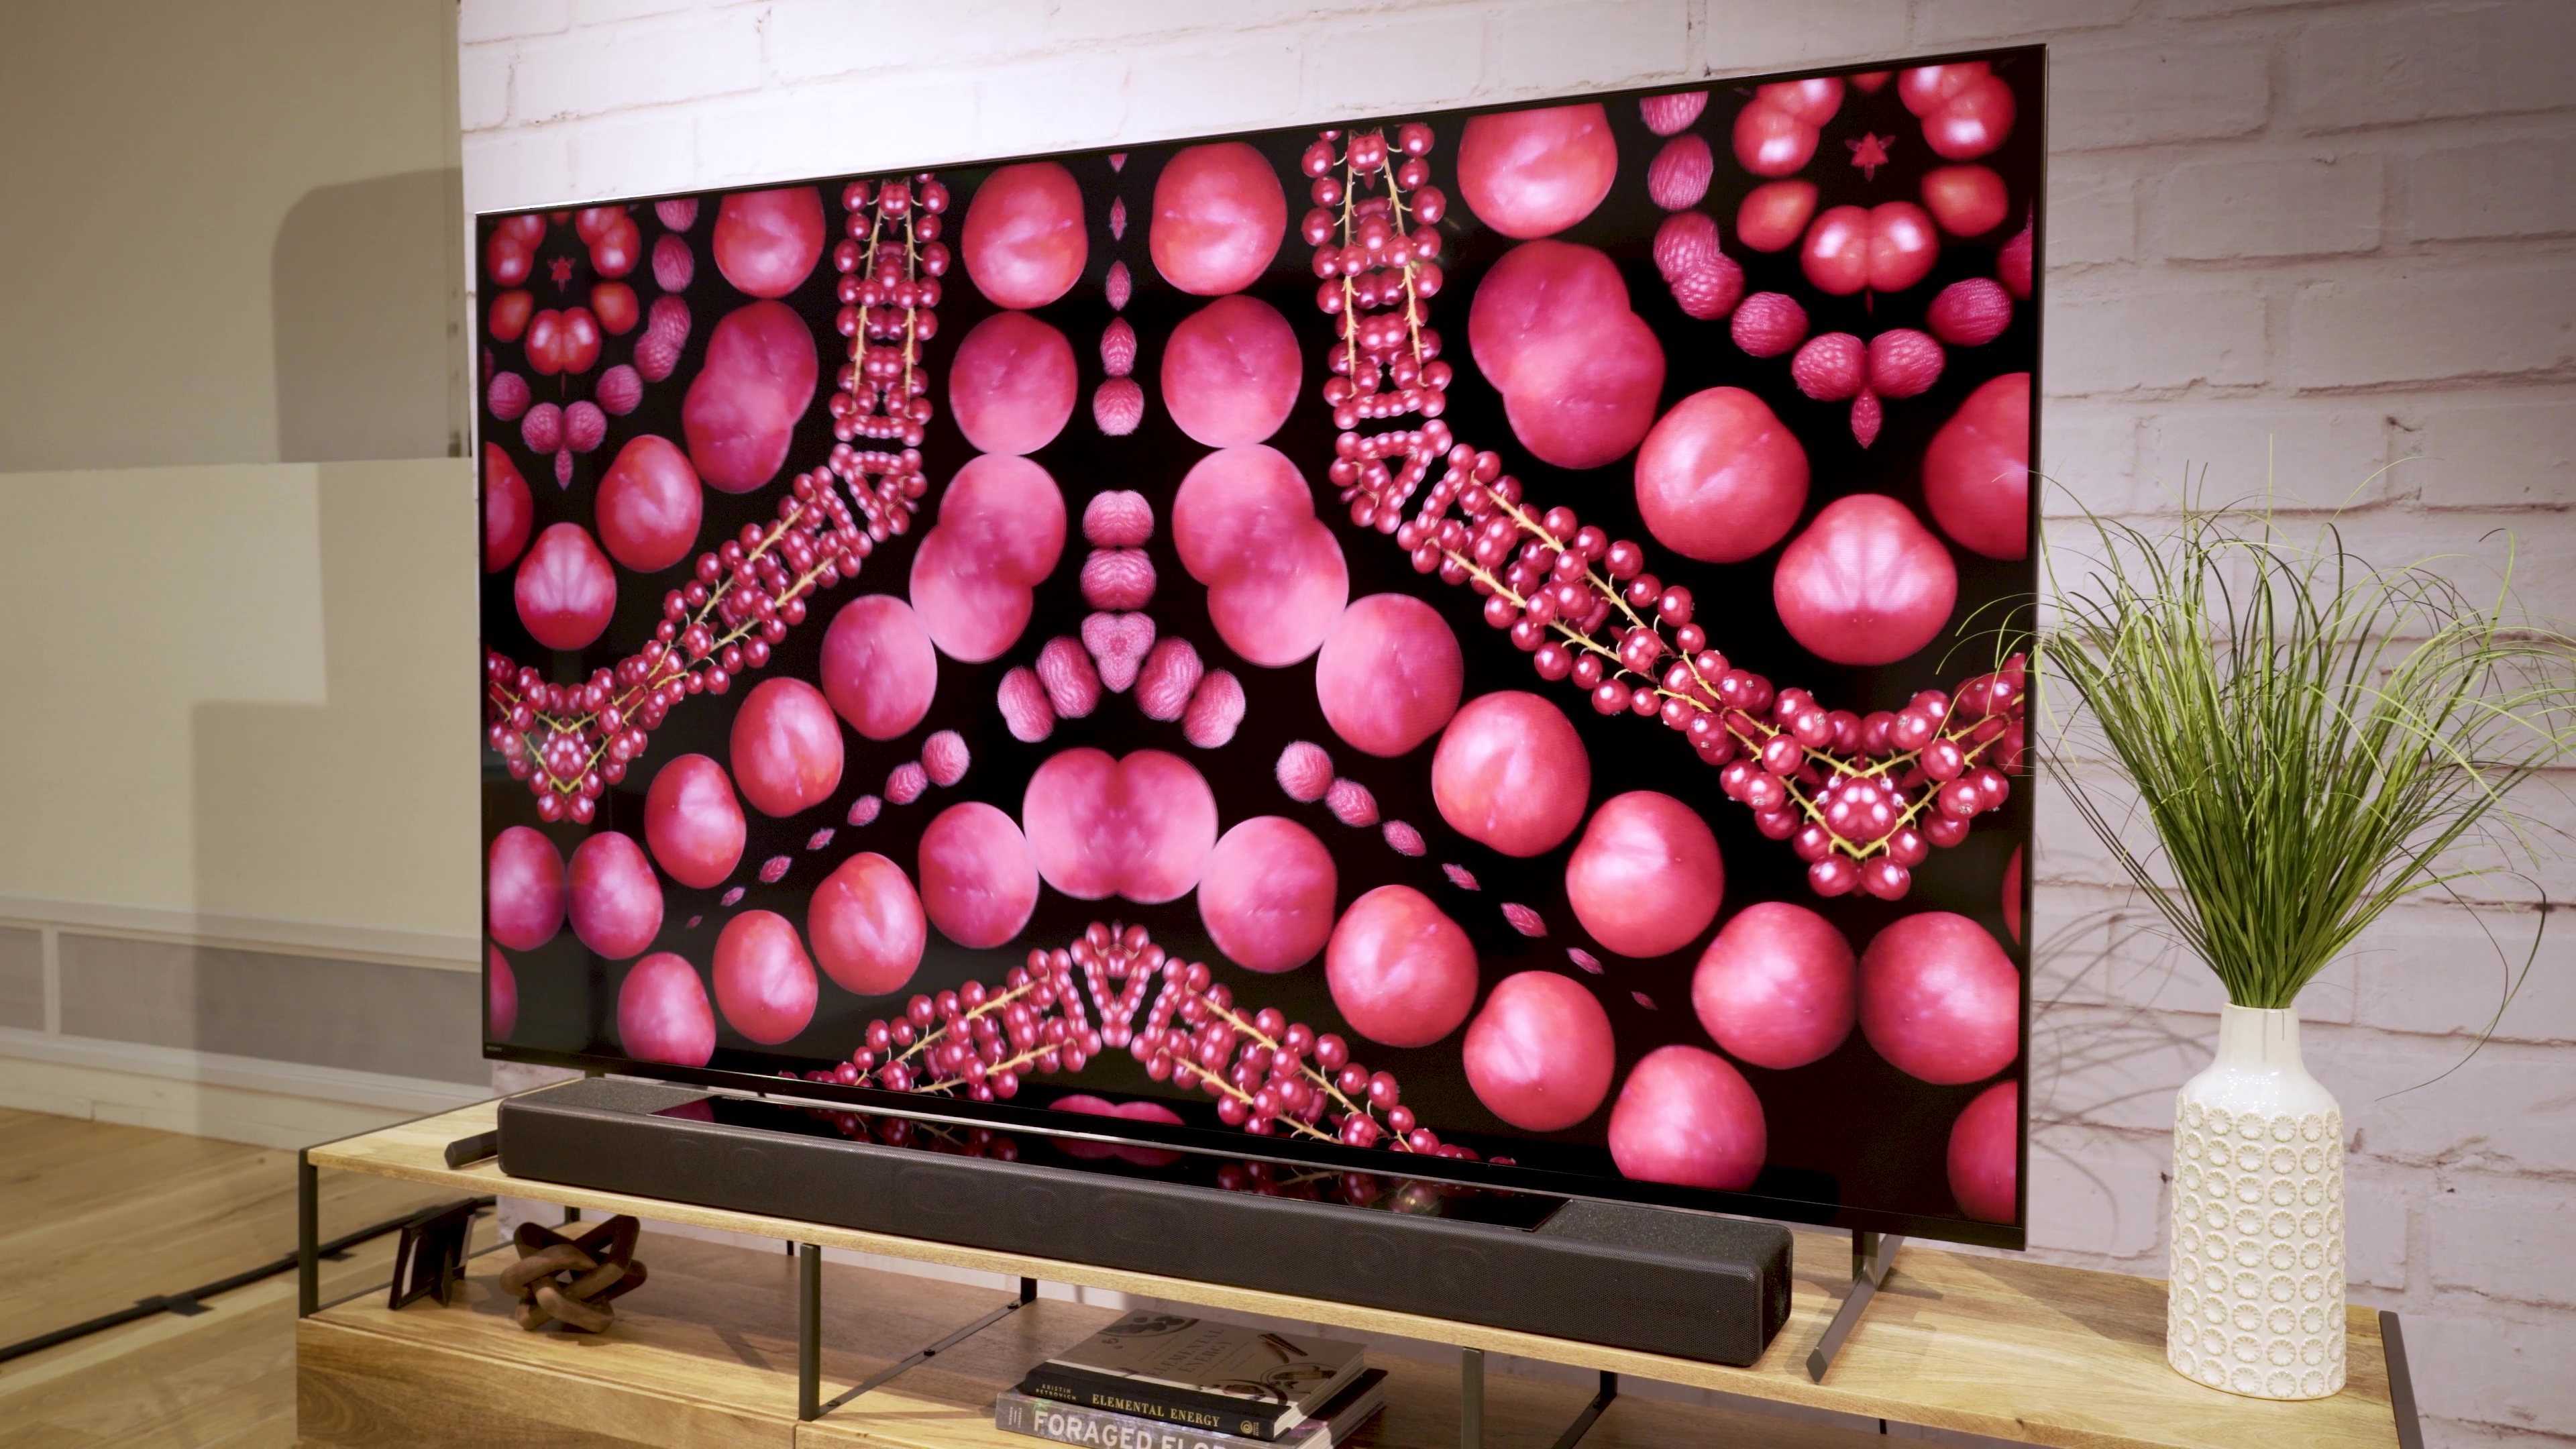 Sony A95L - specifications and features of the 2023 Sony QD-OLED BRAVIA XR  Master Series TVs